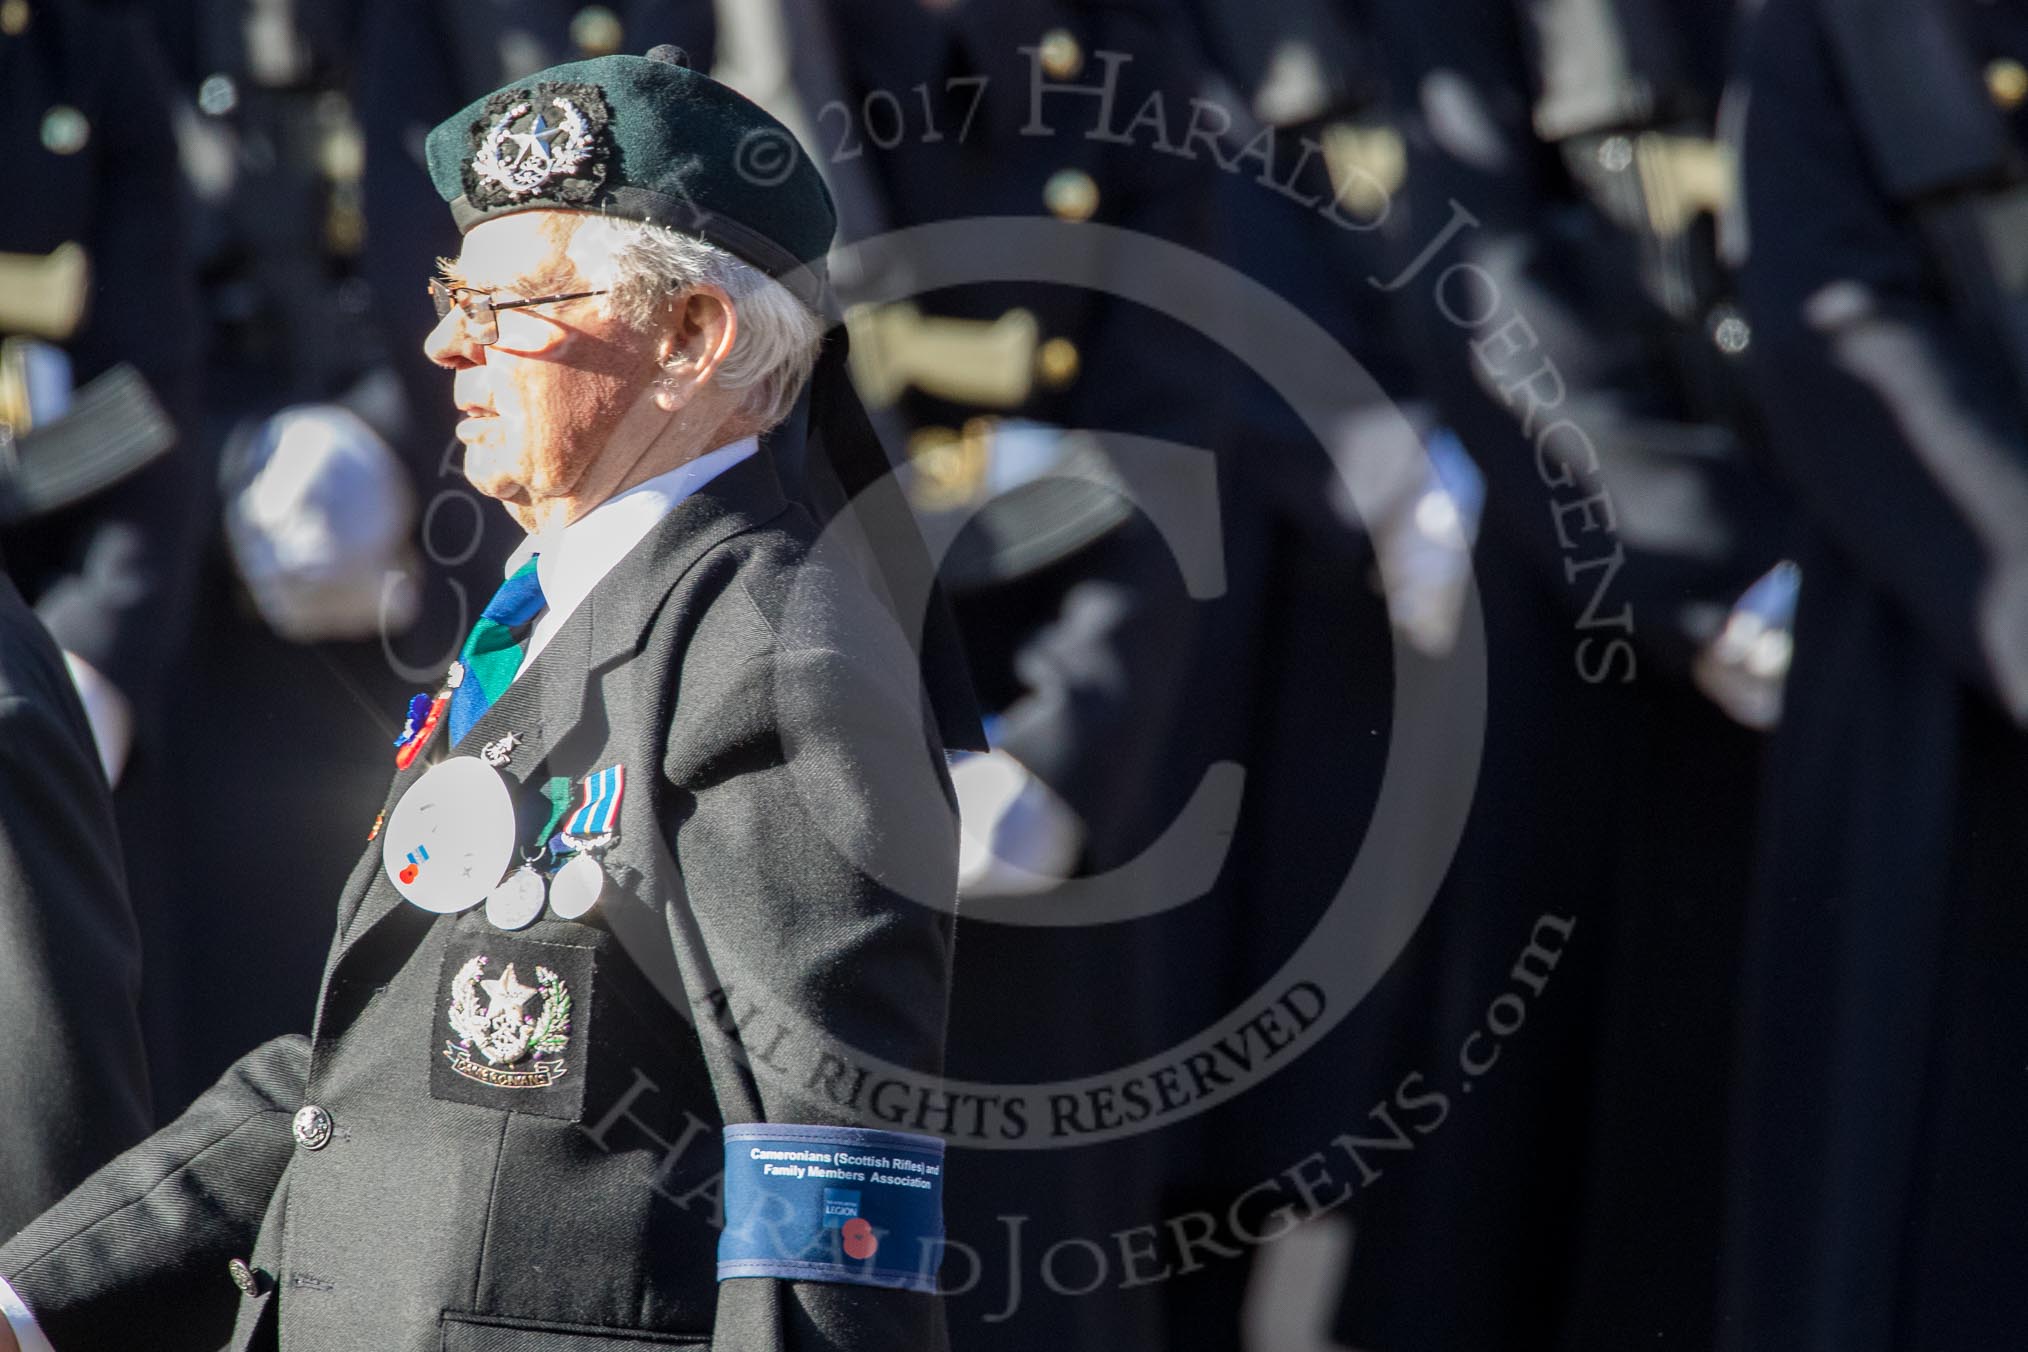 Cameronians (Scottish Rifles) and Family Members Associatiation (Group A14, 6 members) during the Royal British Legion March Past on Remembrance Sunday at the Cenotaph, Whitehall, Westminster, London, 11 November 2018, 11:58.